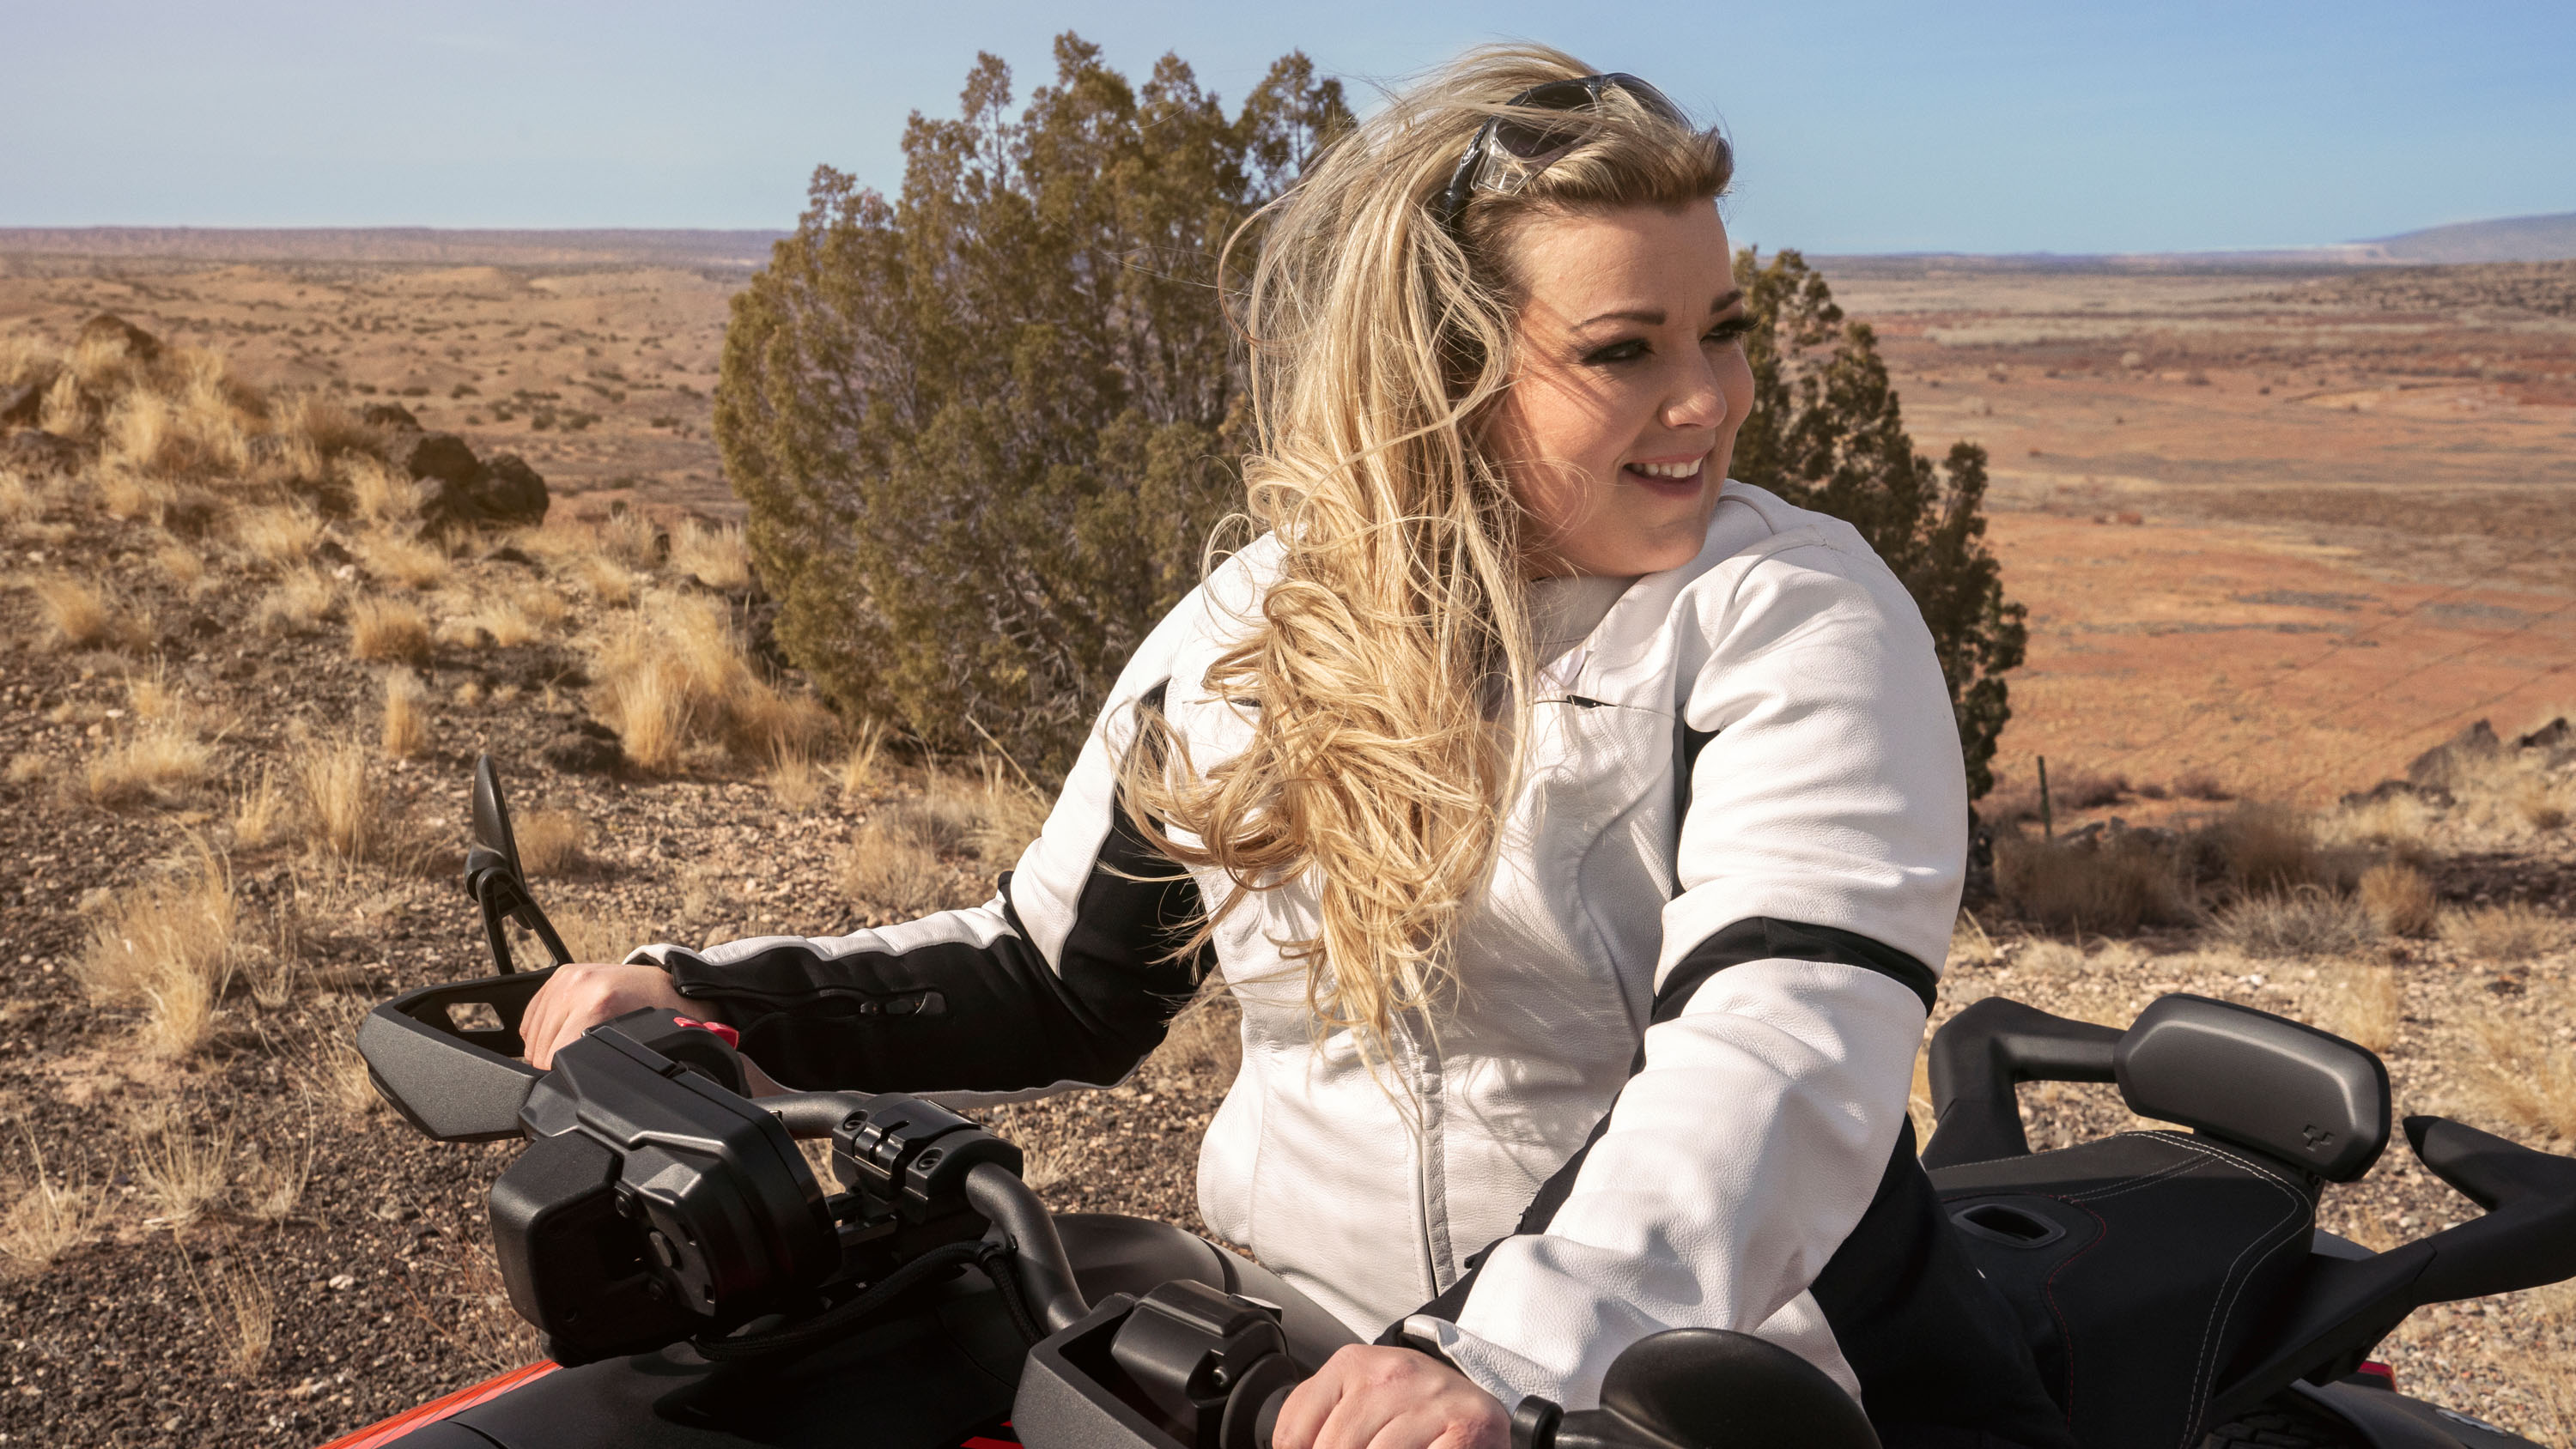 Brittany Morrow on her Can-Am Spyder